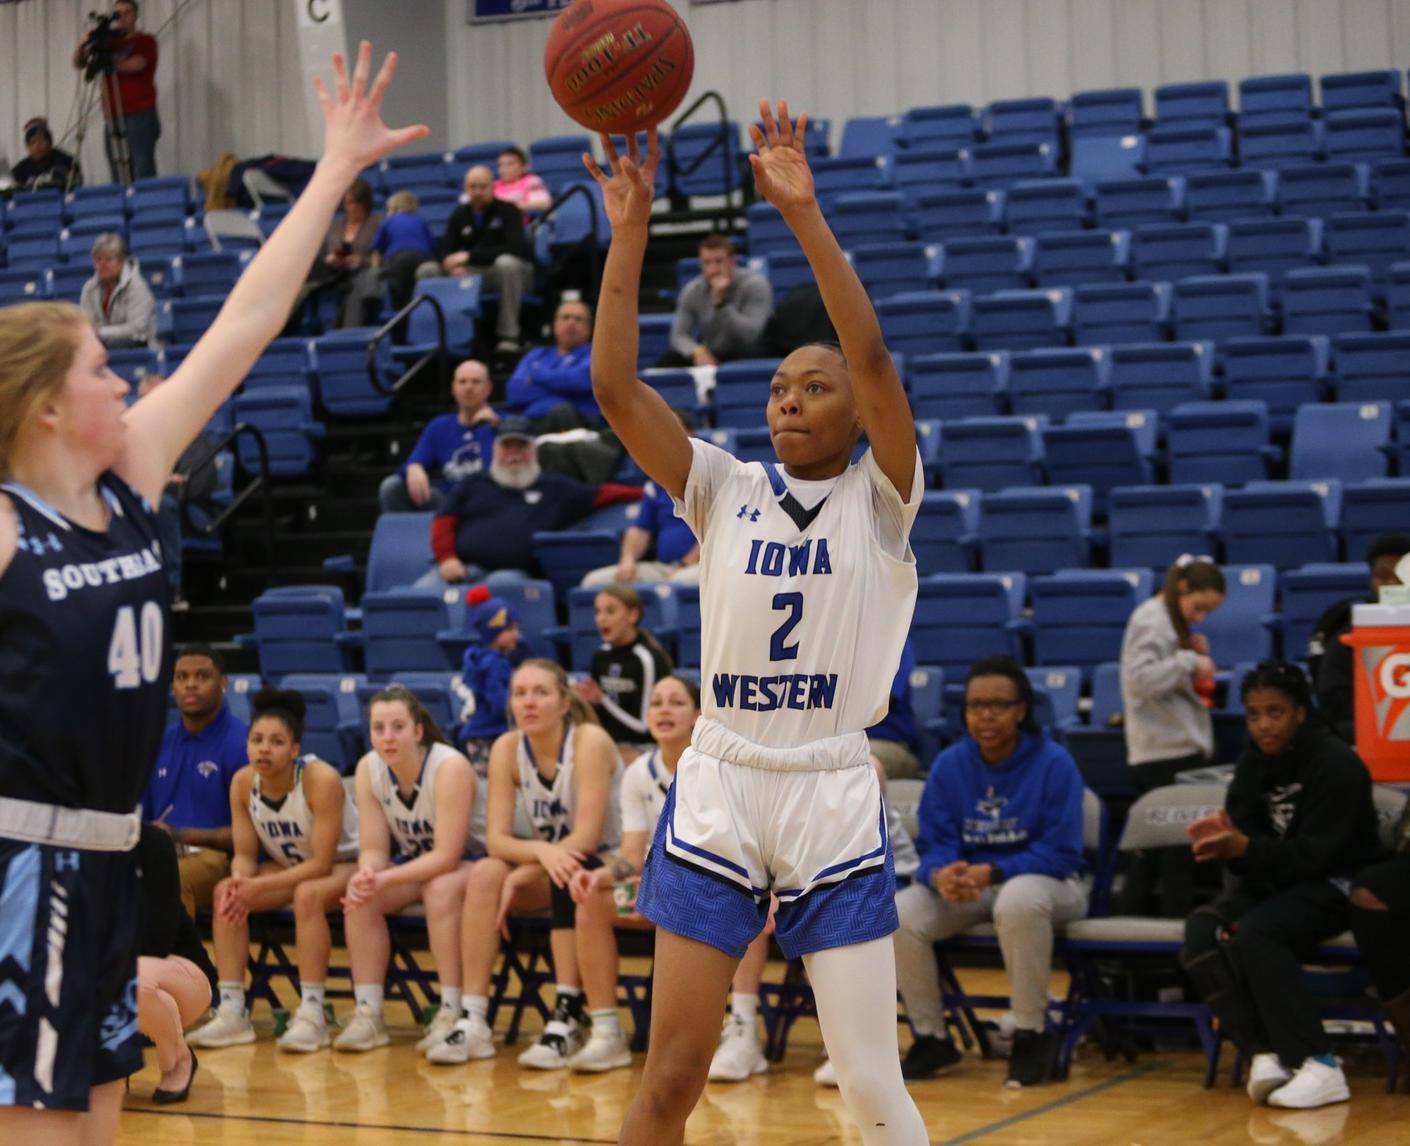 Cougars end winning streak for Reivers on last second shot